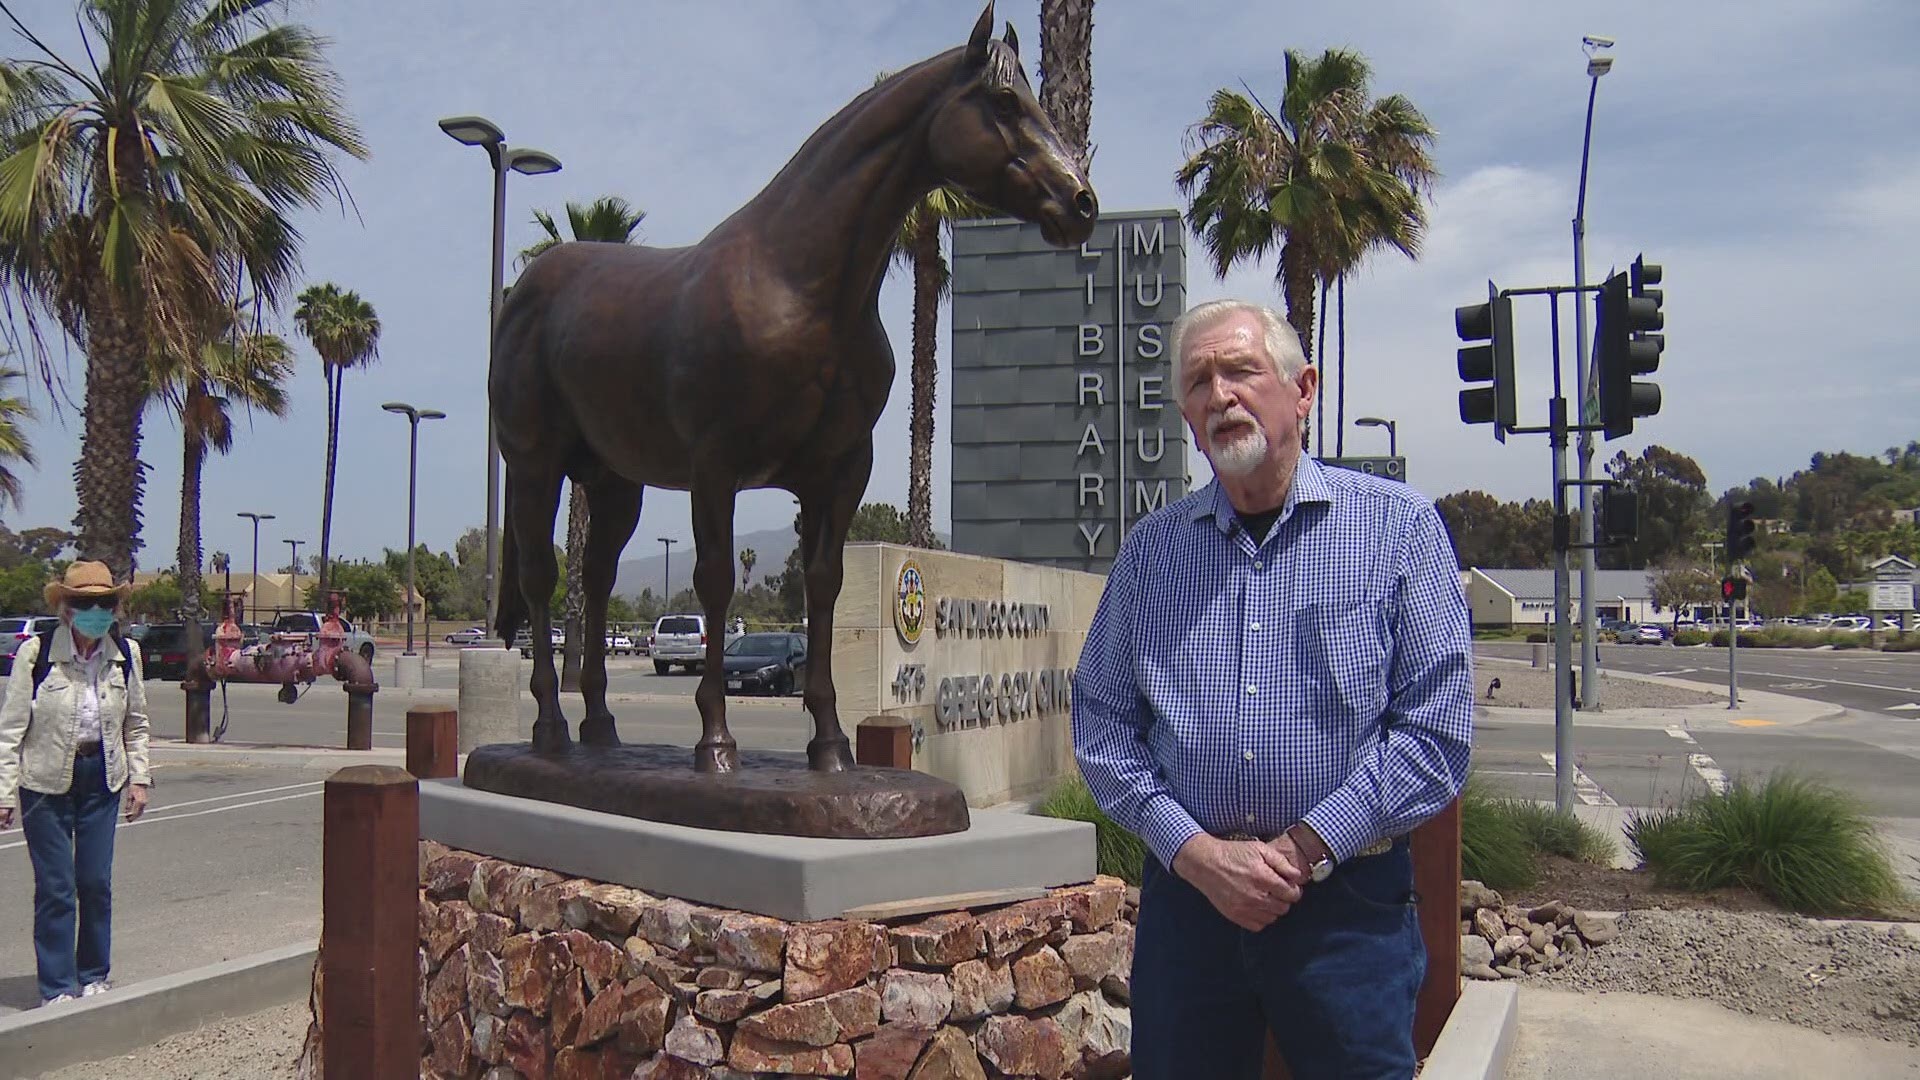 Heads are turning at the Bonita Museum and Cultural Center. A new statue on display symbolizes the history and culture of the Bonita community as "horse country."
Ar